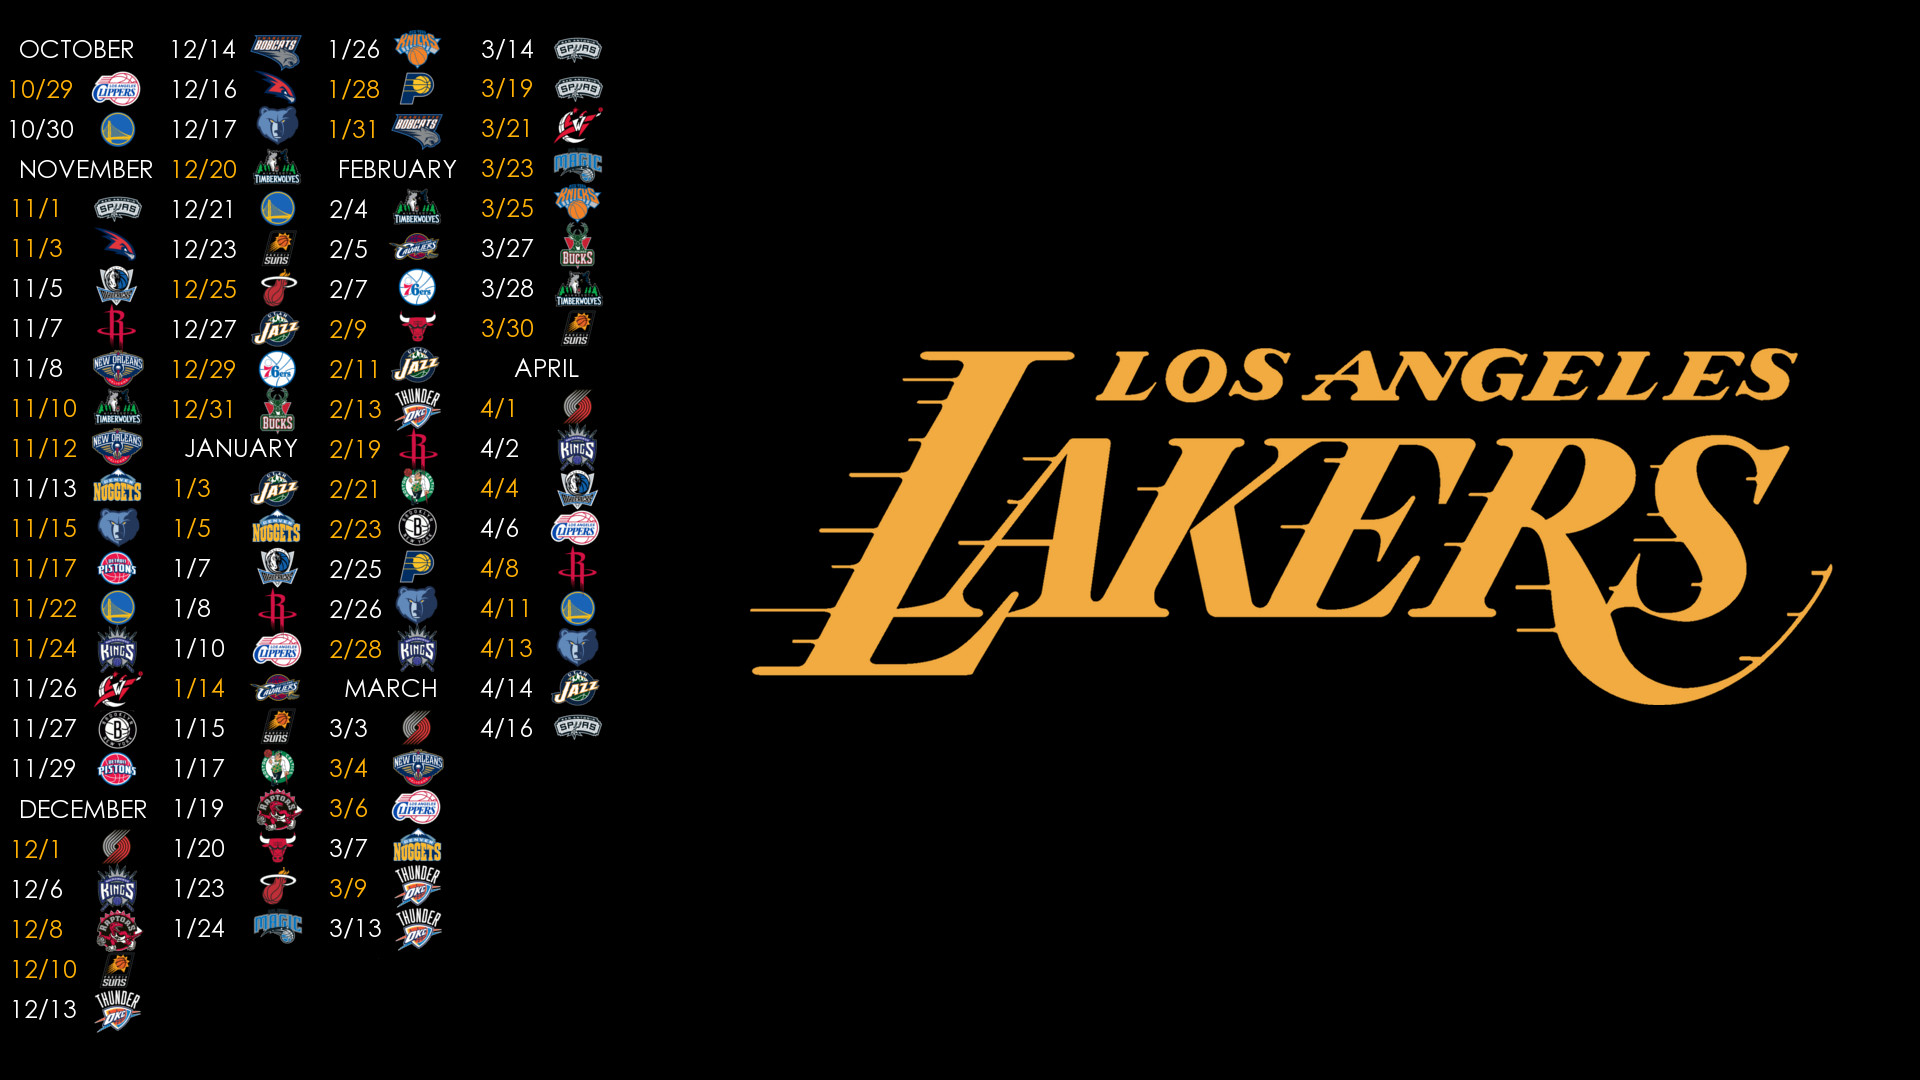 1920x1080 lakers | Lakers Desktop Wallpapers | THE OFFICIAL SITE OF THE LOS .